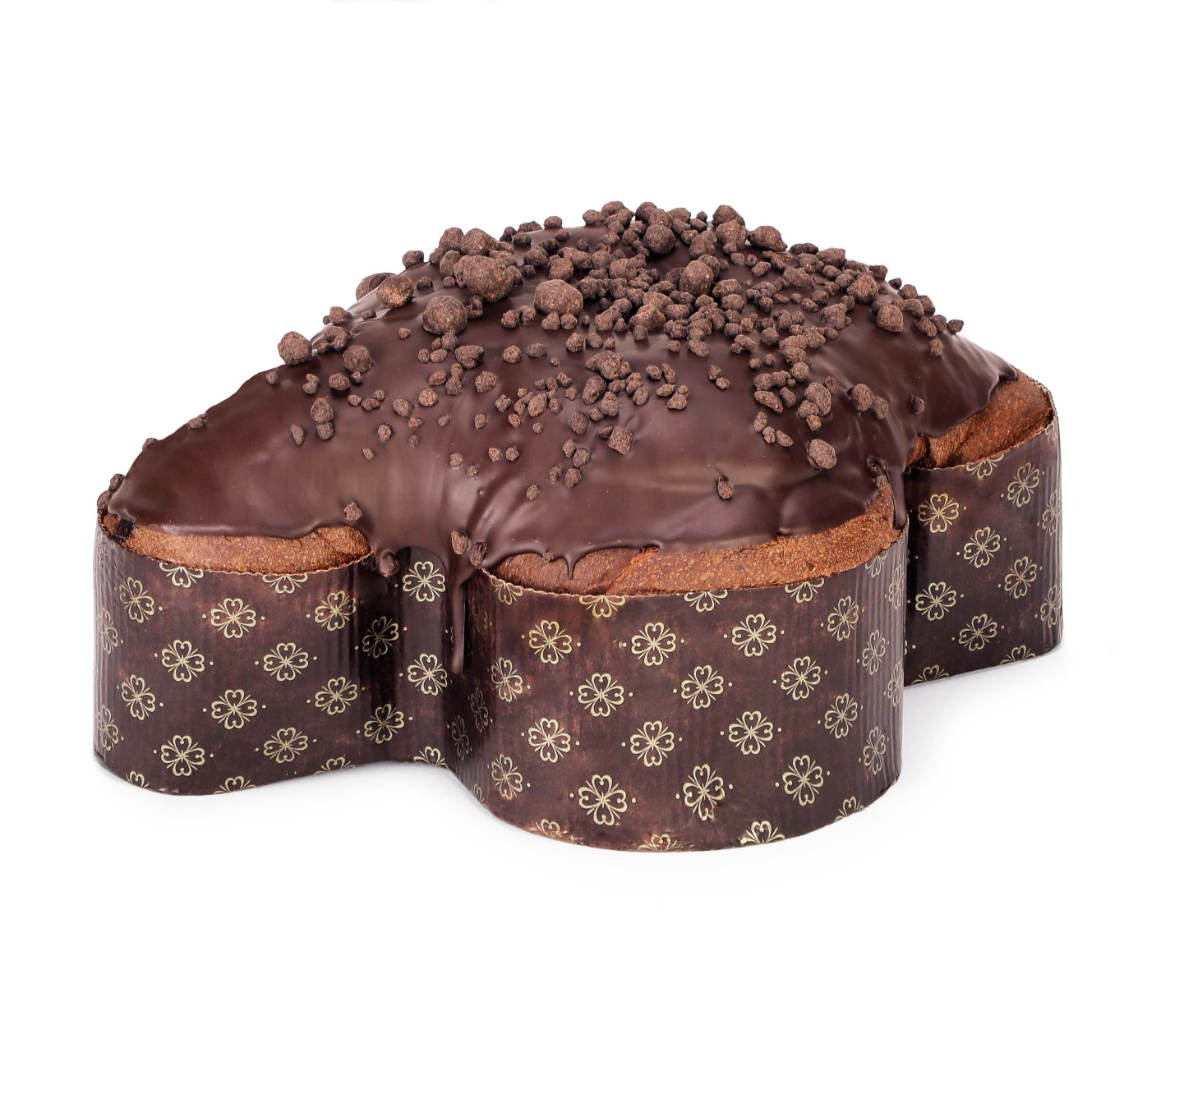 Colomba By Dolce&Gabbana And Fiasconaro - The New Speciality Pastry Of The Italian Tradition